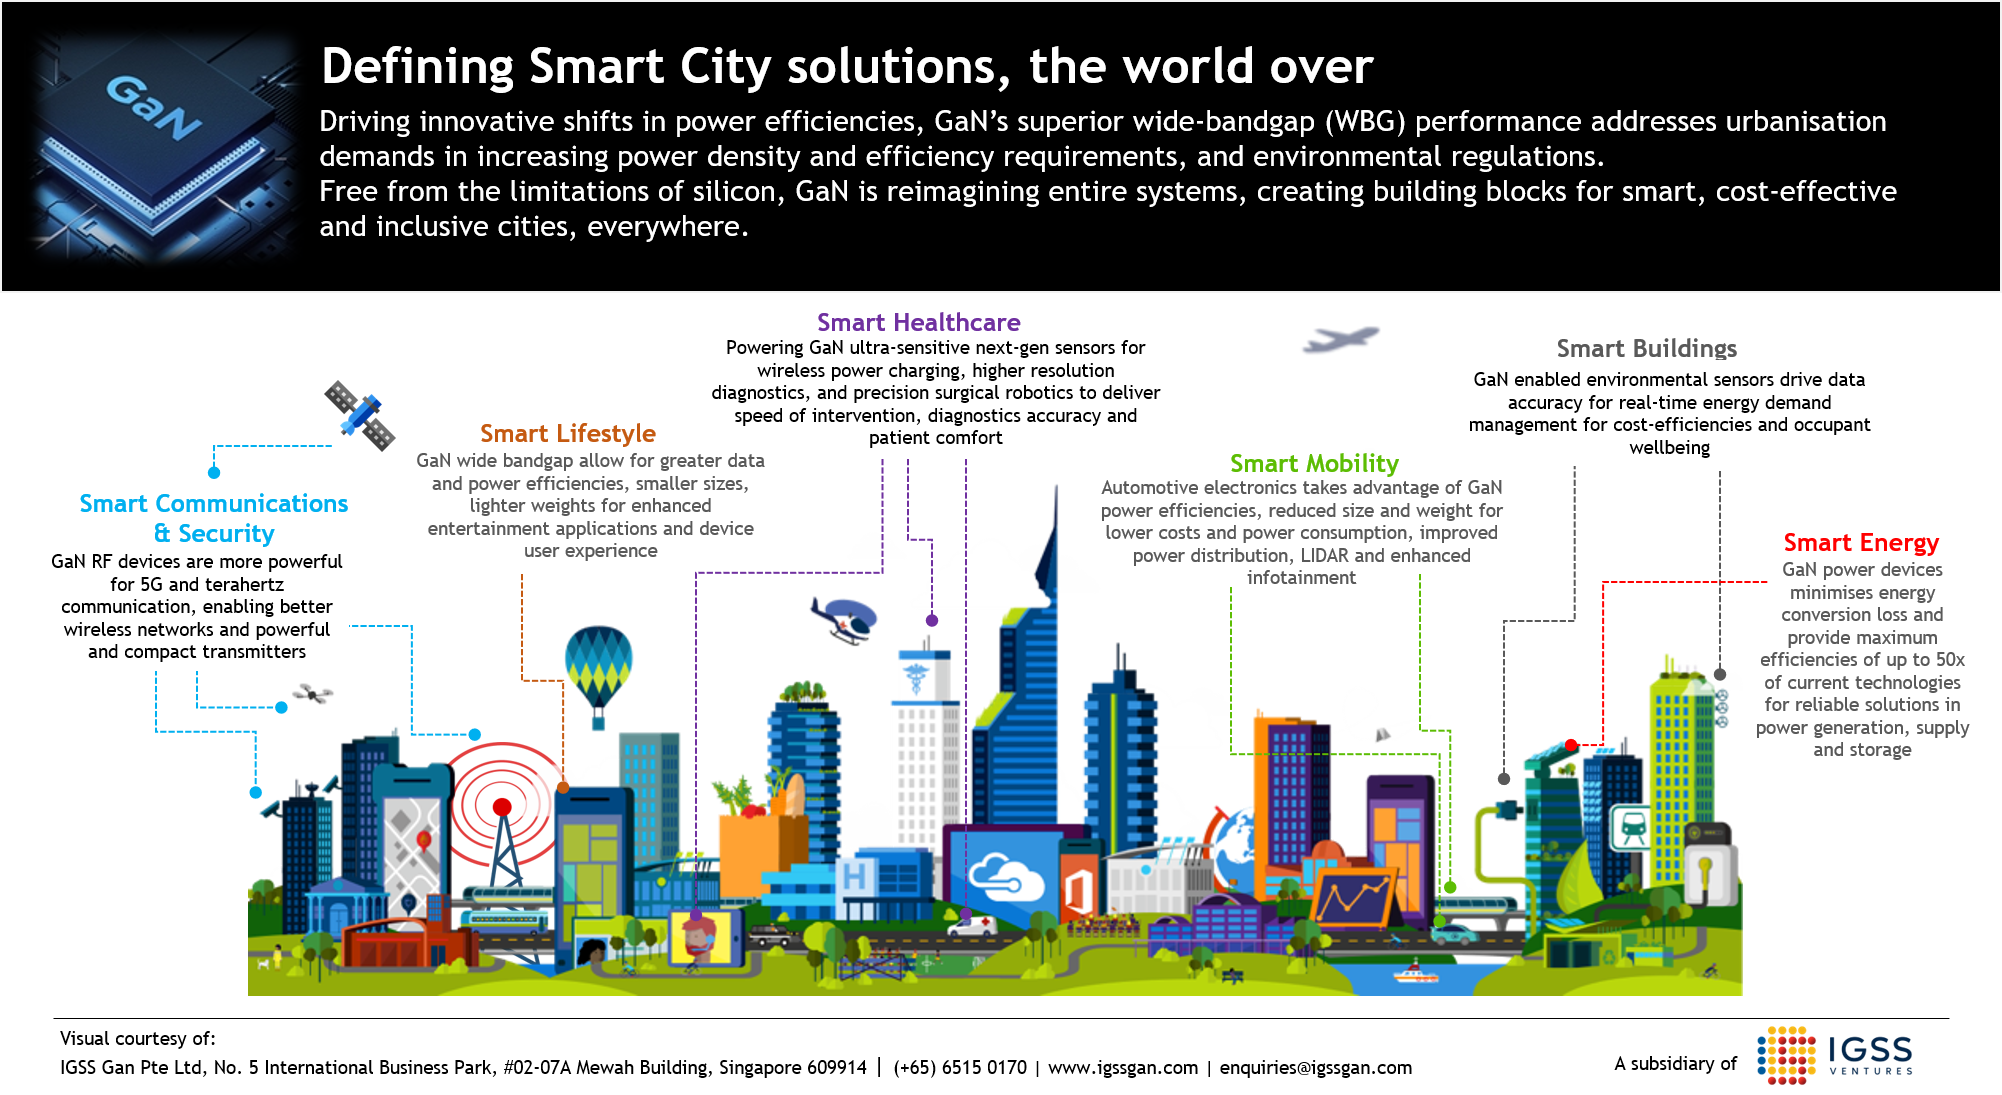 GaN technology fulfils two key criteria: improving the output power and keeping costs and energy consumption low simultaneously, leapfrogging solutions in smart city and sustainability. 